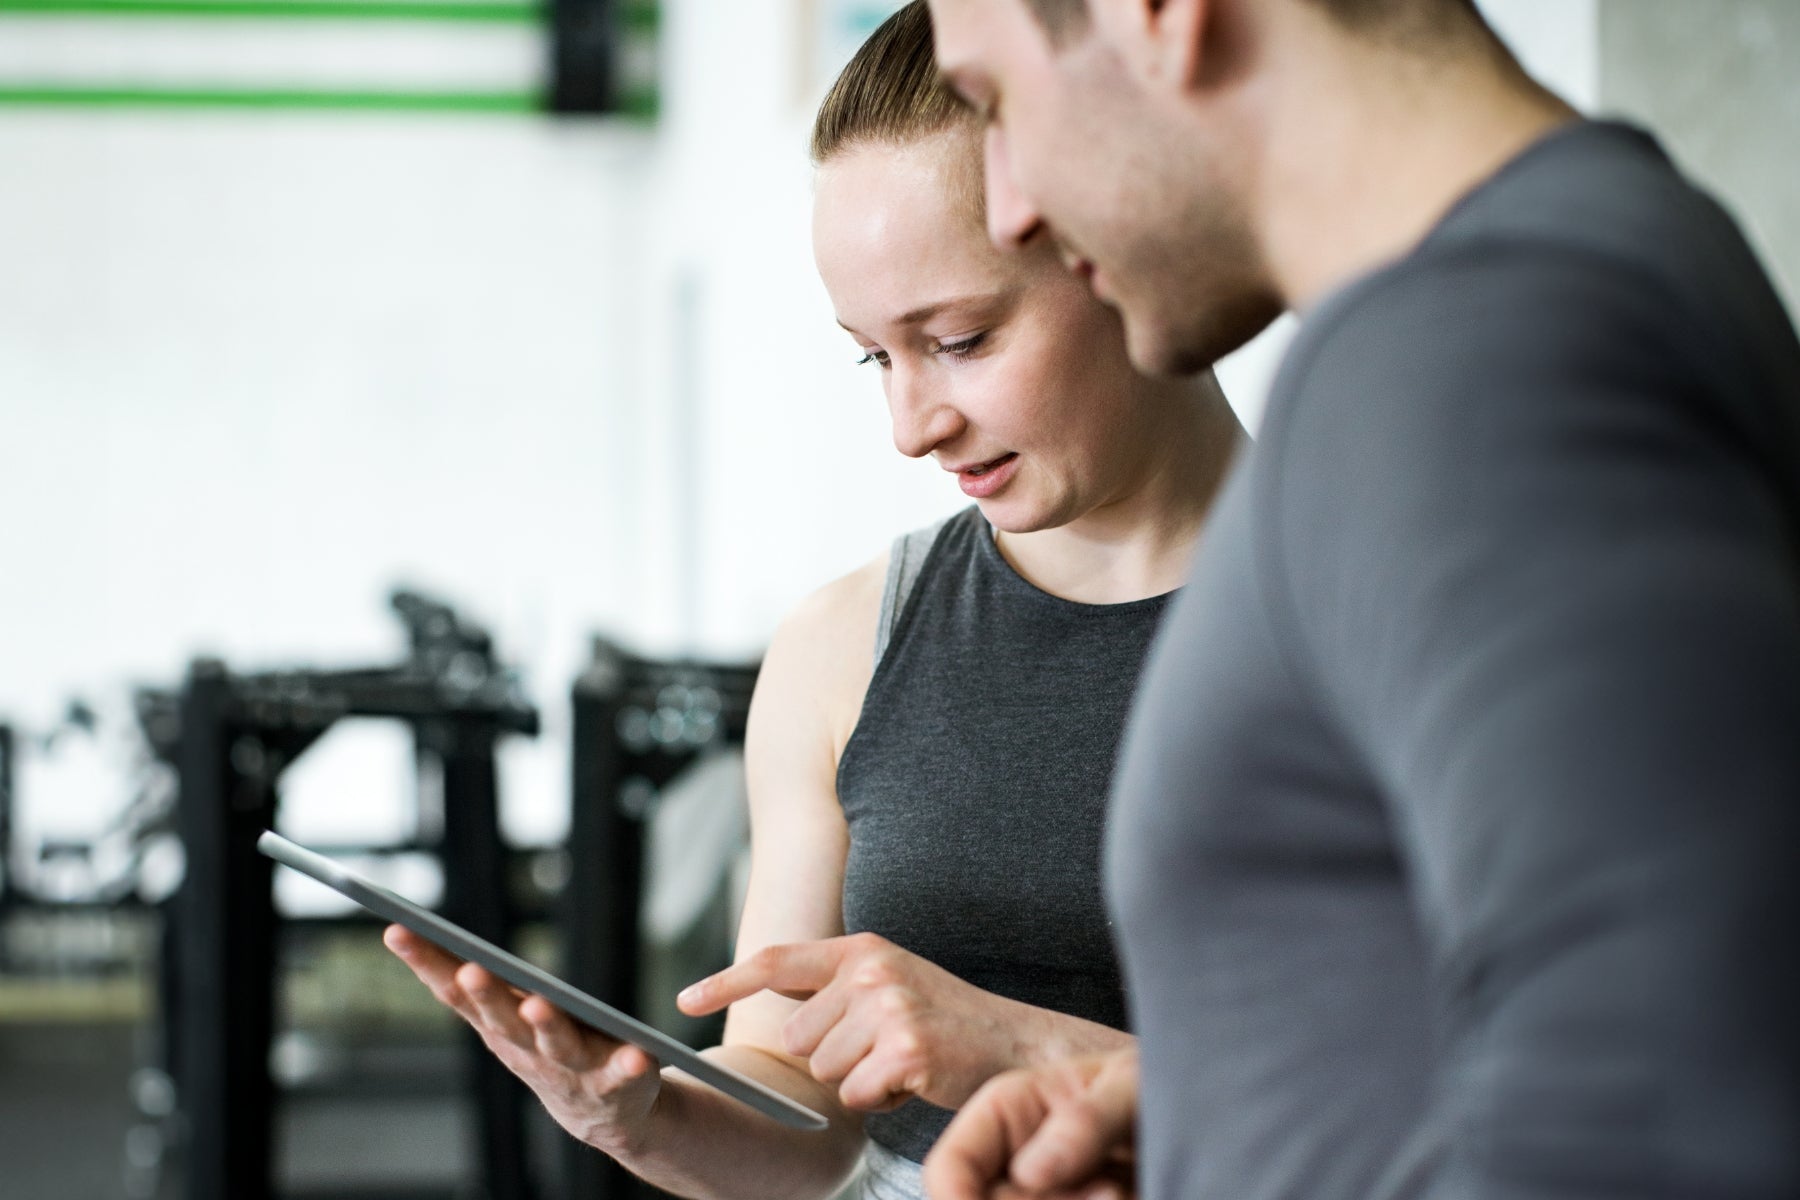 The Essential Guide to Waiver Documents for Personal Trainers